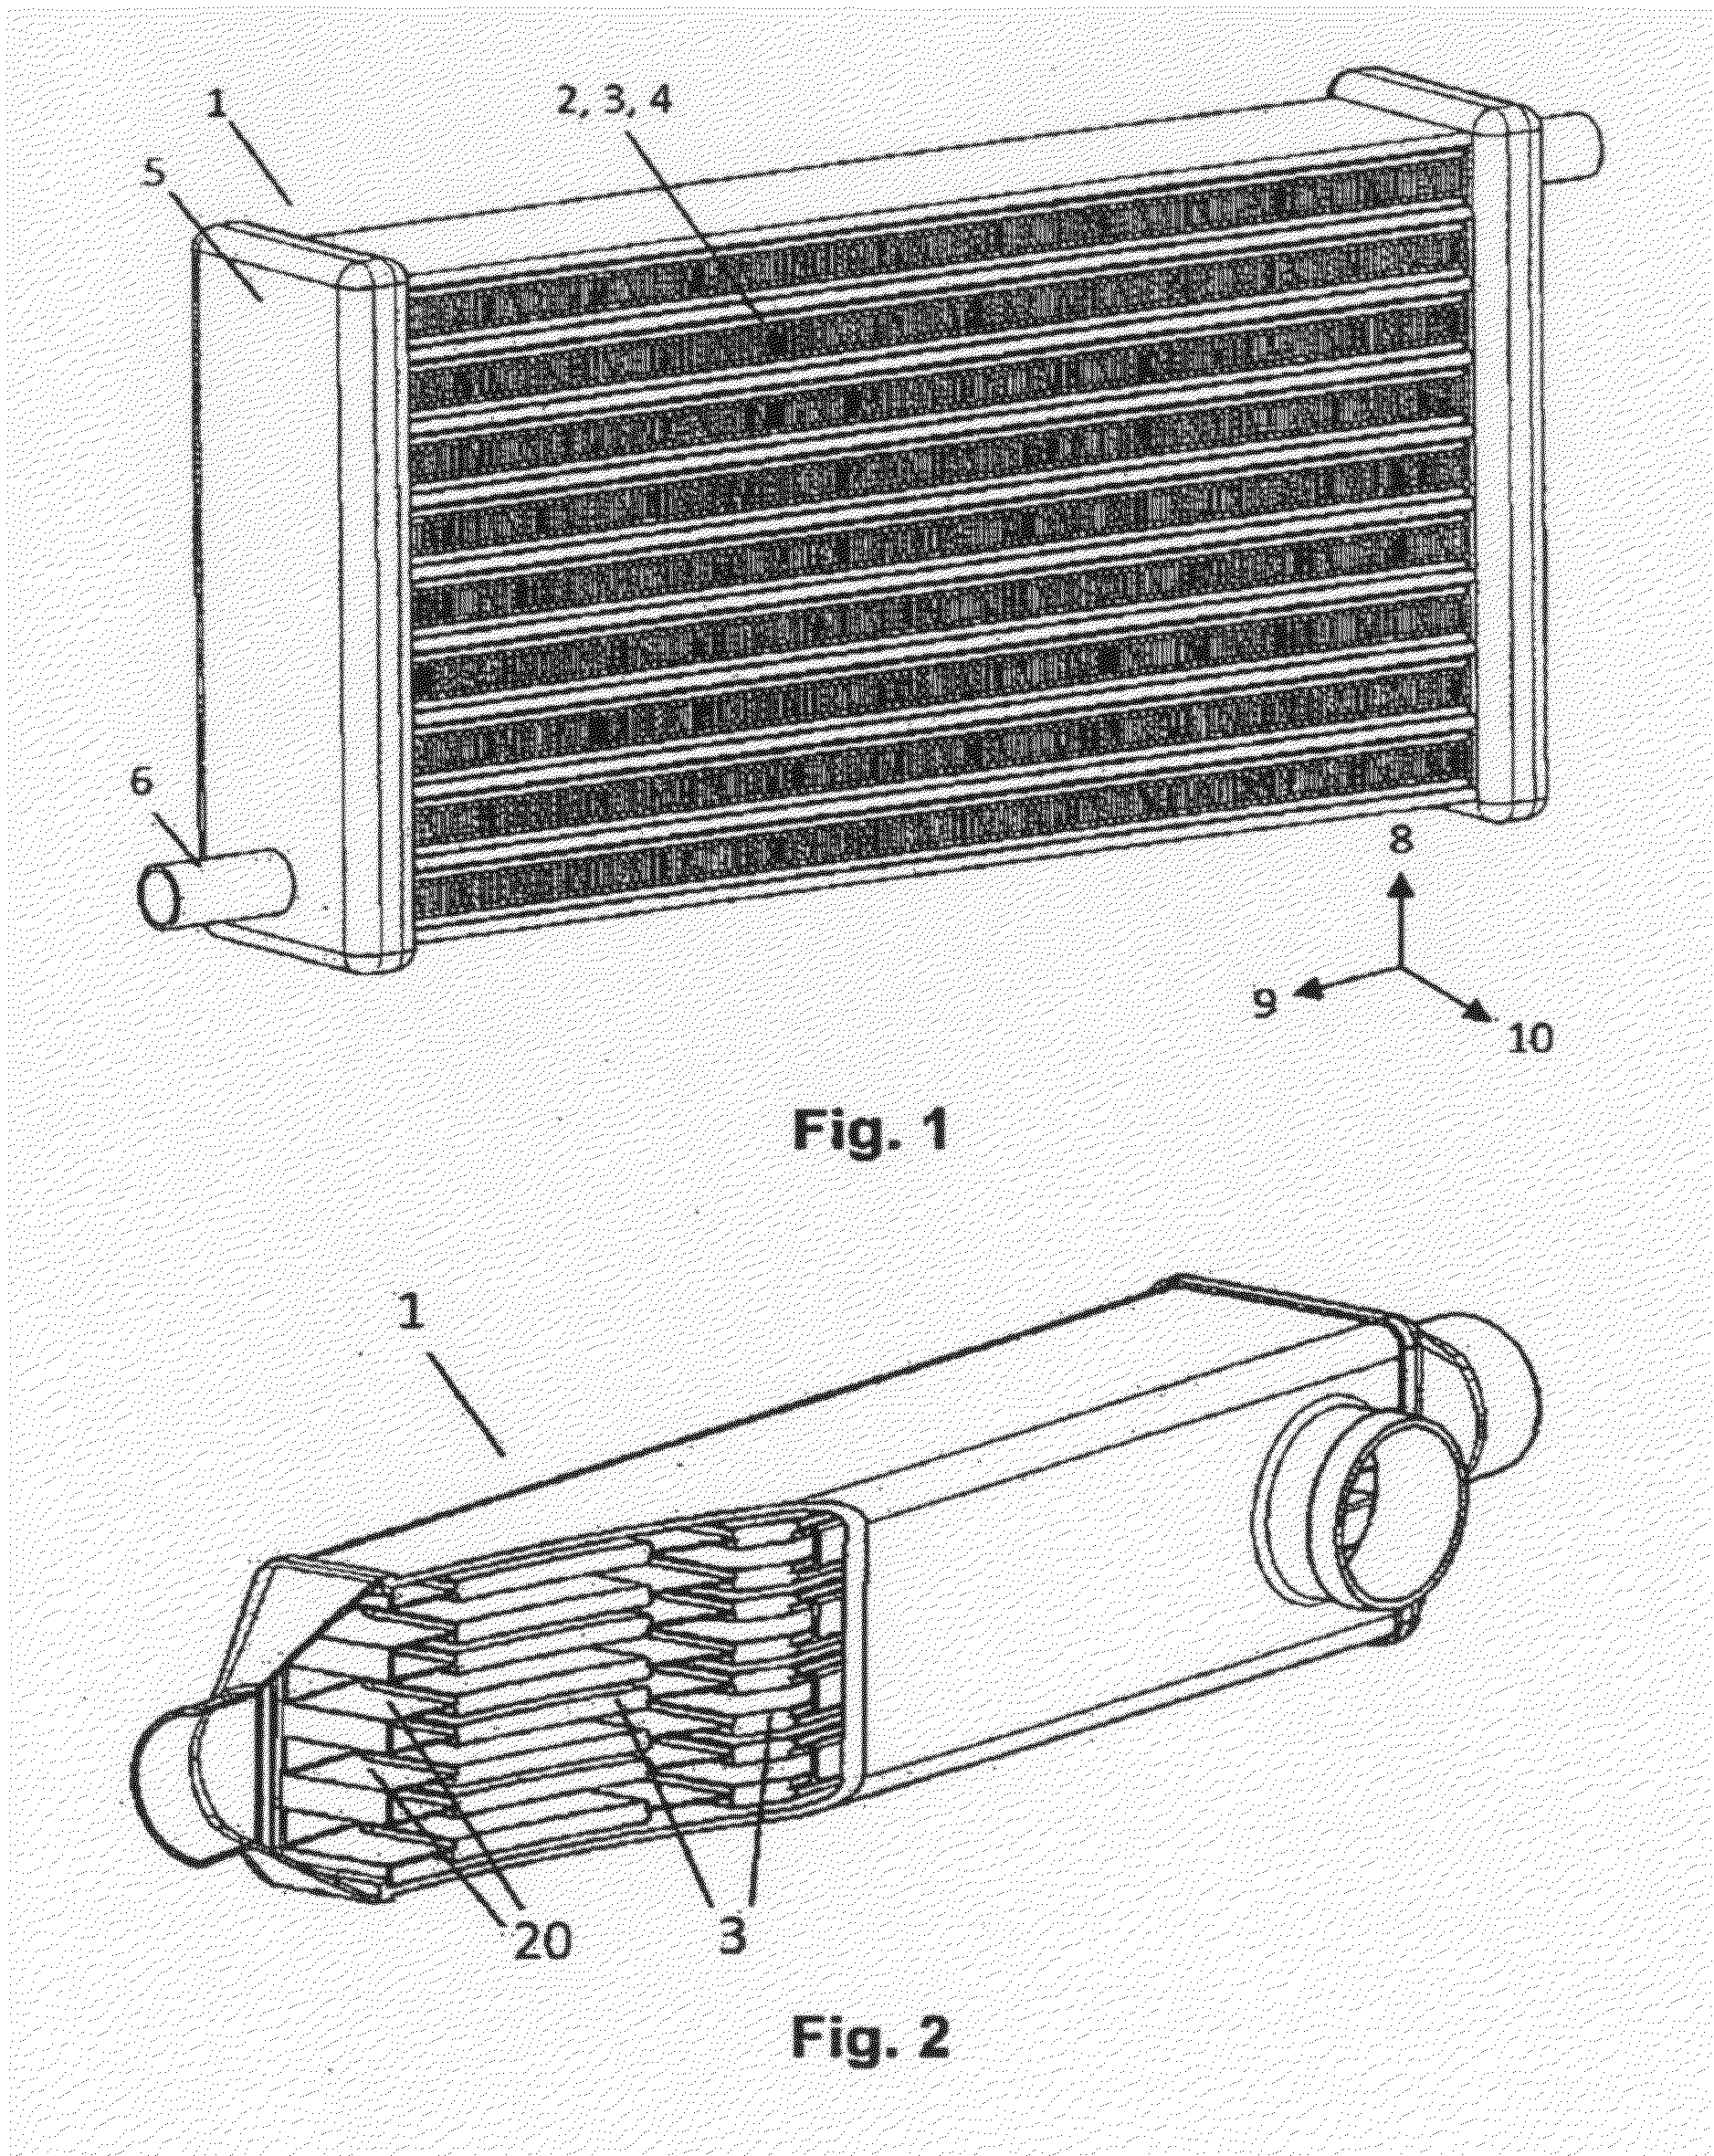 Thermoelectric heat exchanger